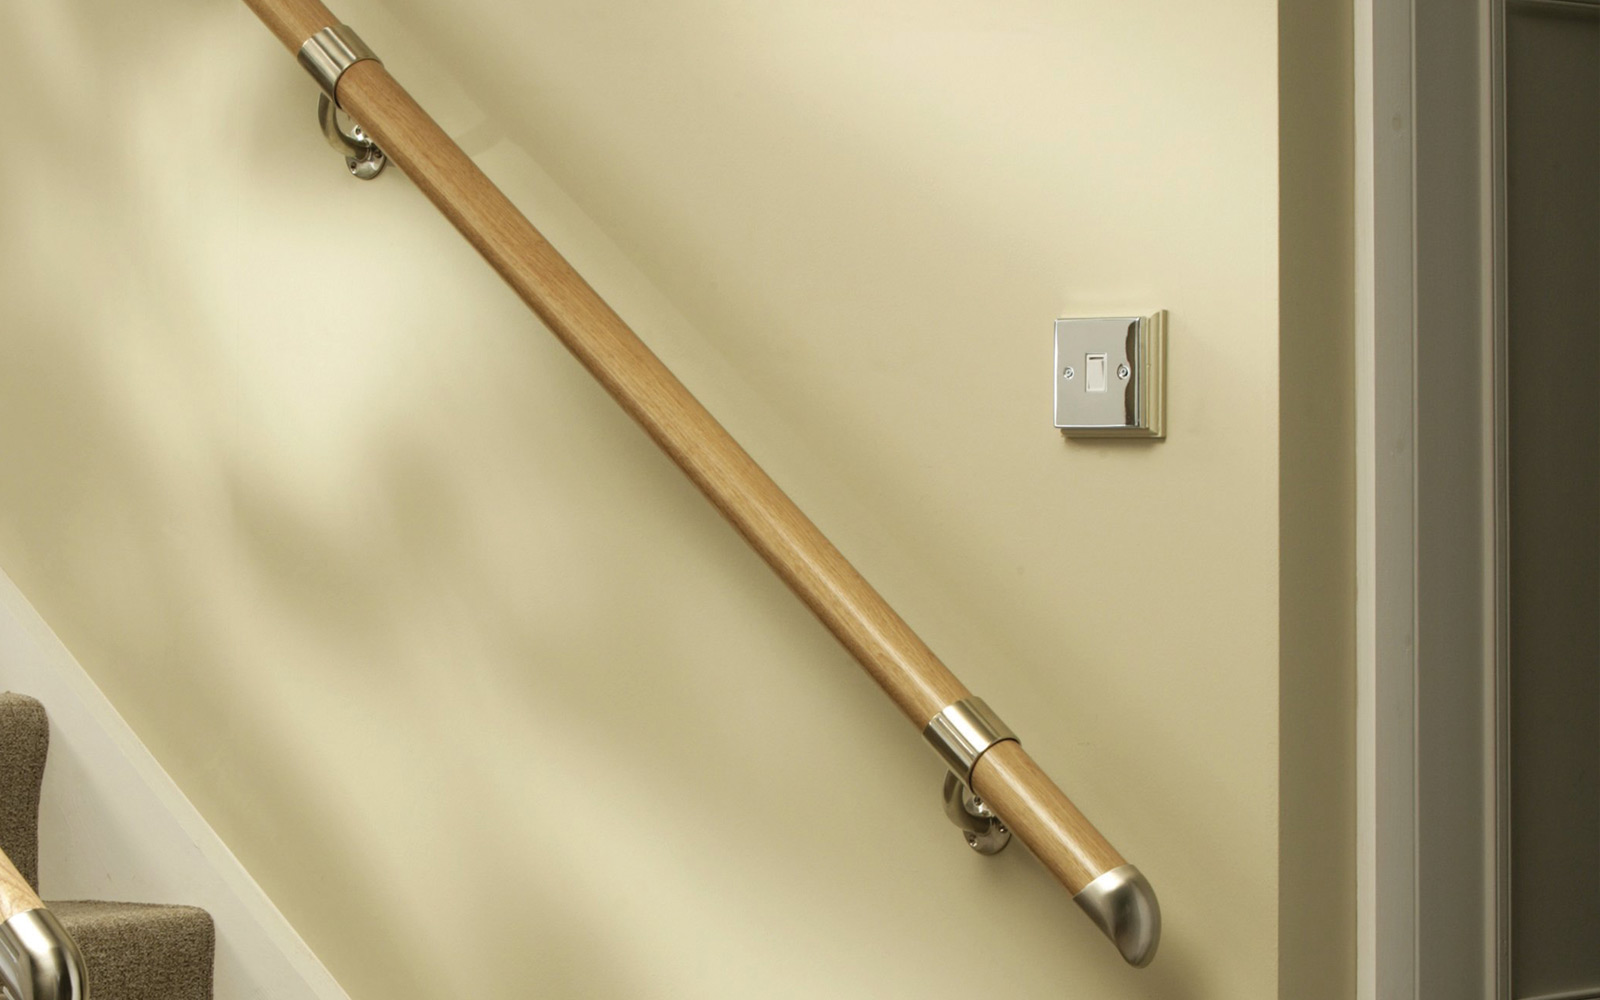 Wall Mounted Wooden Handrail Kits Available In White Oak And Pine